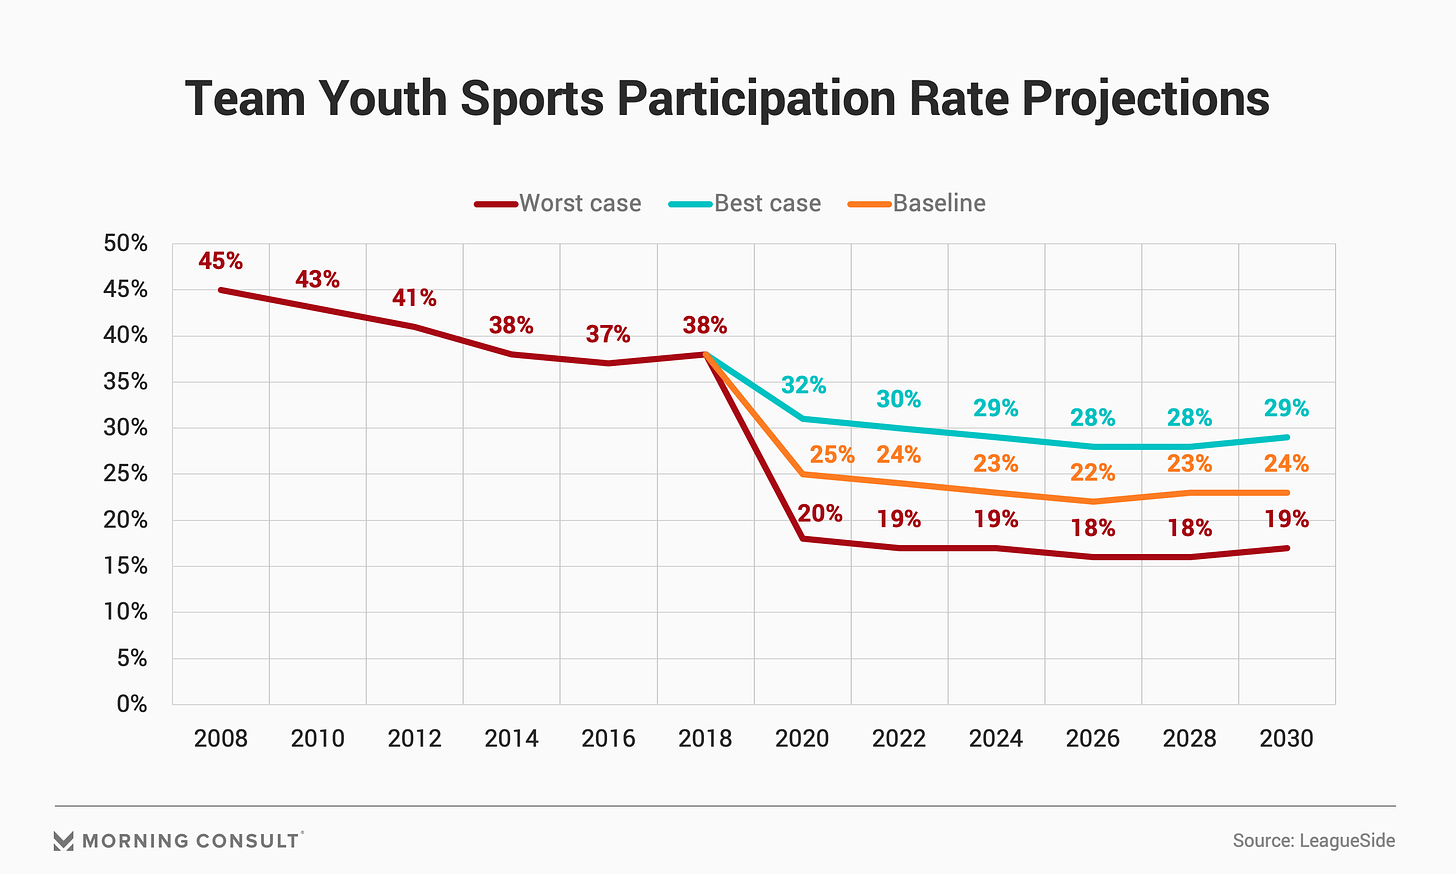 graph of team youth sports participation rates over time